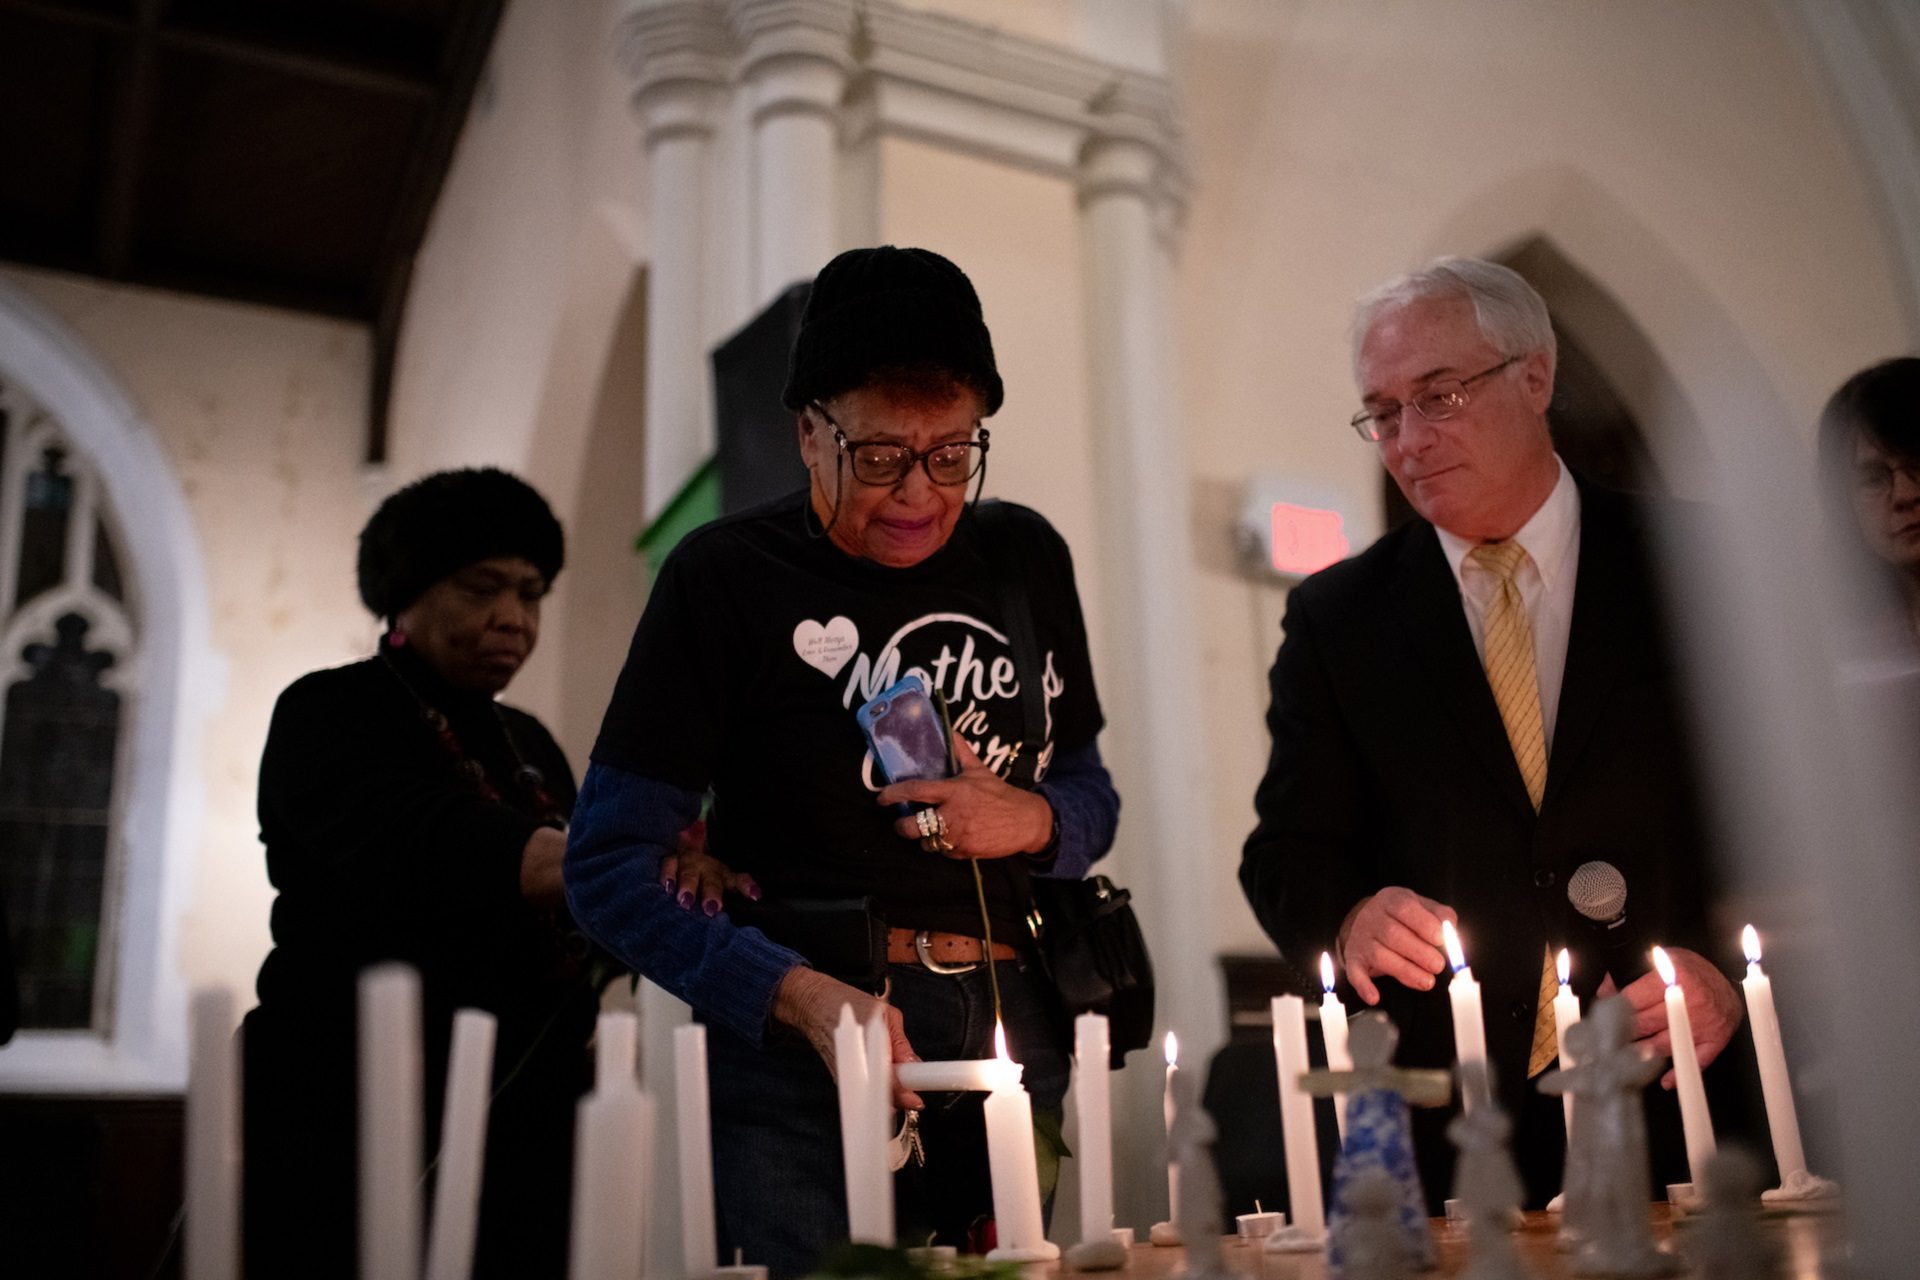 Dr. Patricia Griffin lights a candle for her son, Darien Griffin, and cousin, Gregory Mumford, during a vigil for gun violence victims at Broad Street Ministry on Wednesday, December 11, 2019.